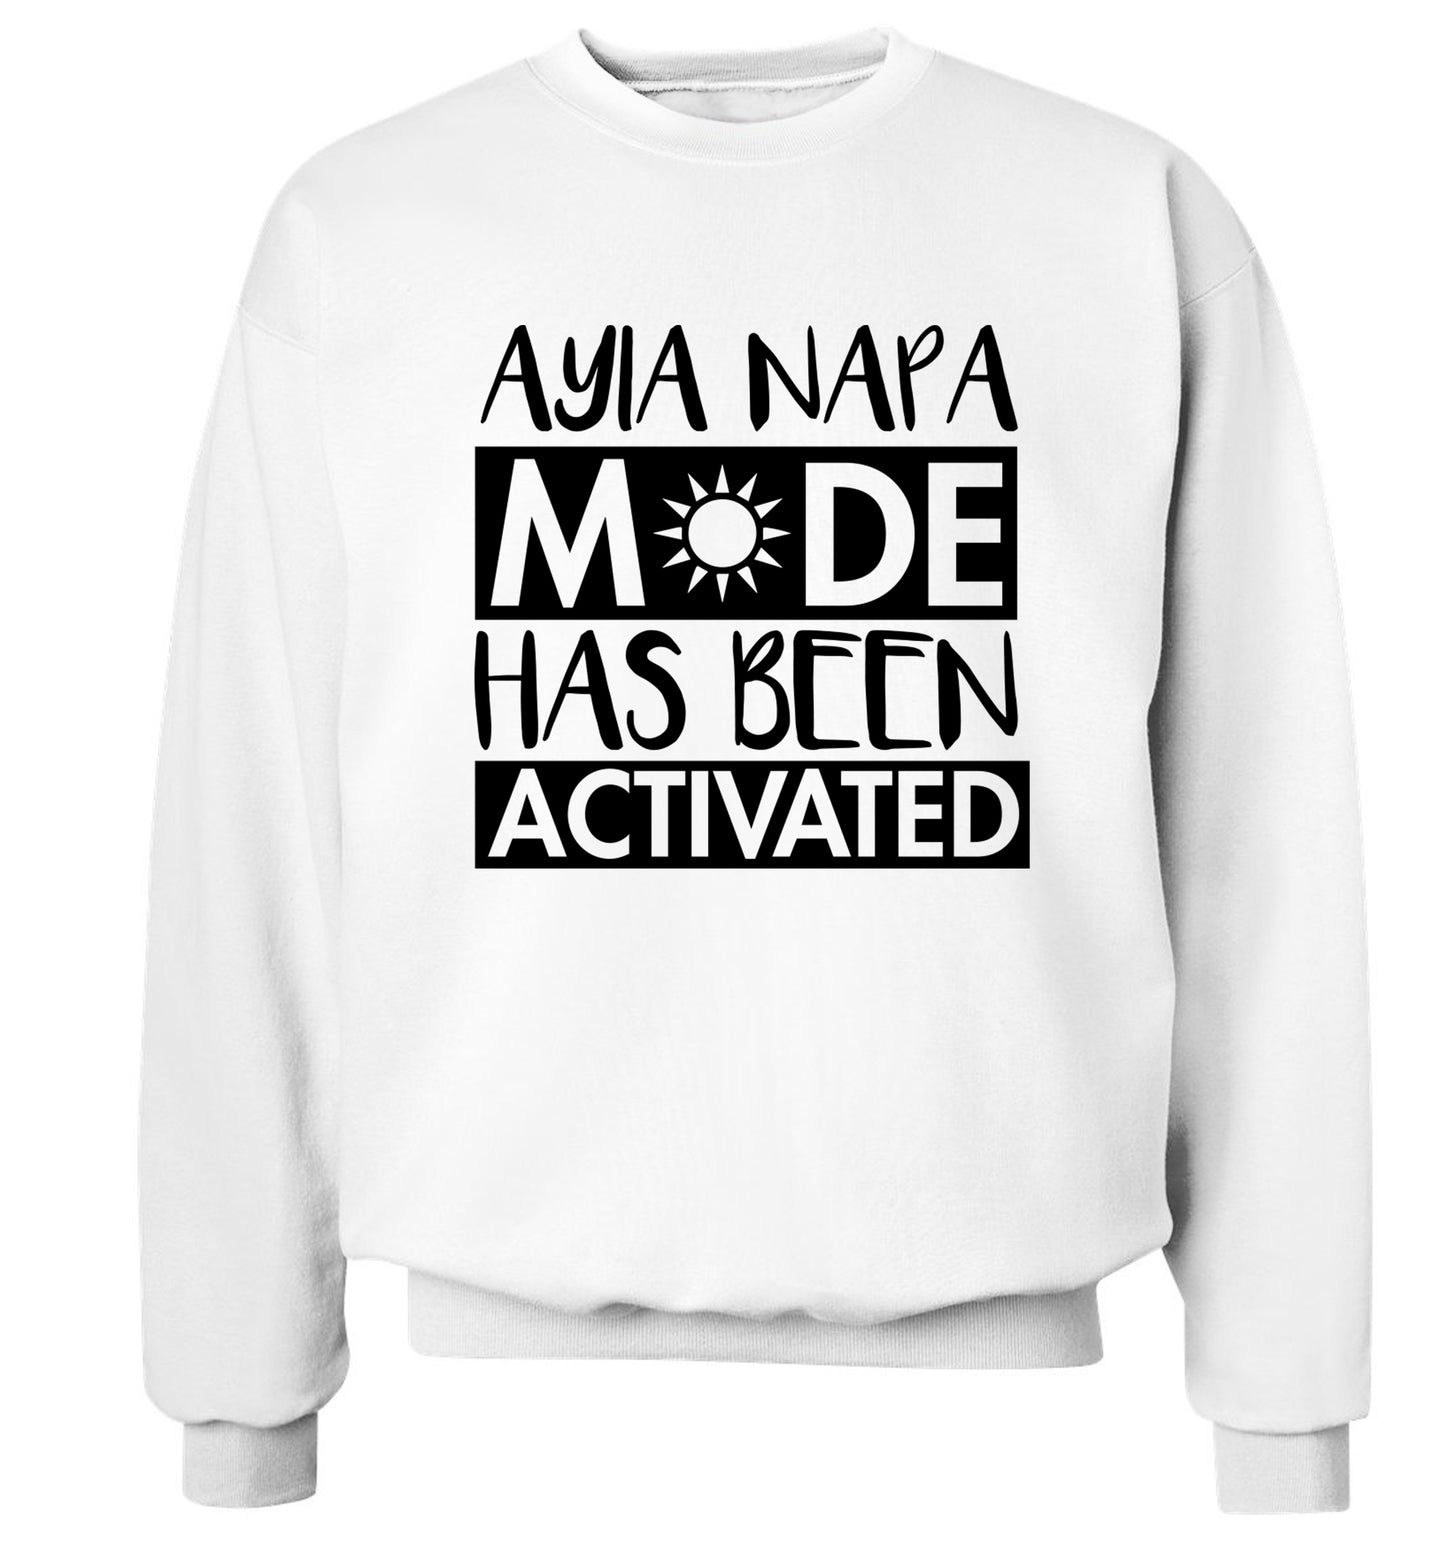 Ayia Napa mode has been activated Adult's unisex white Sweater 2XL